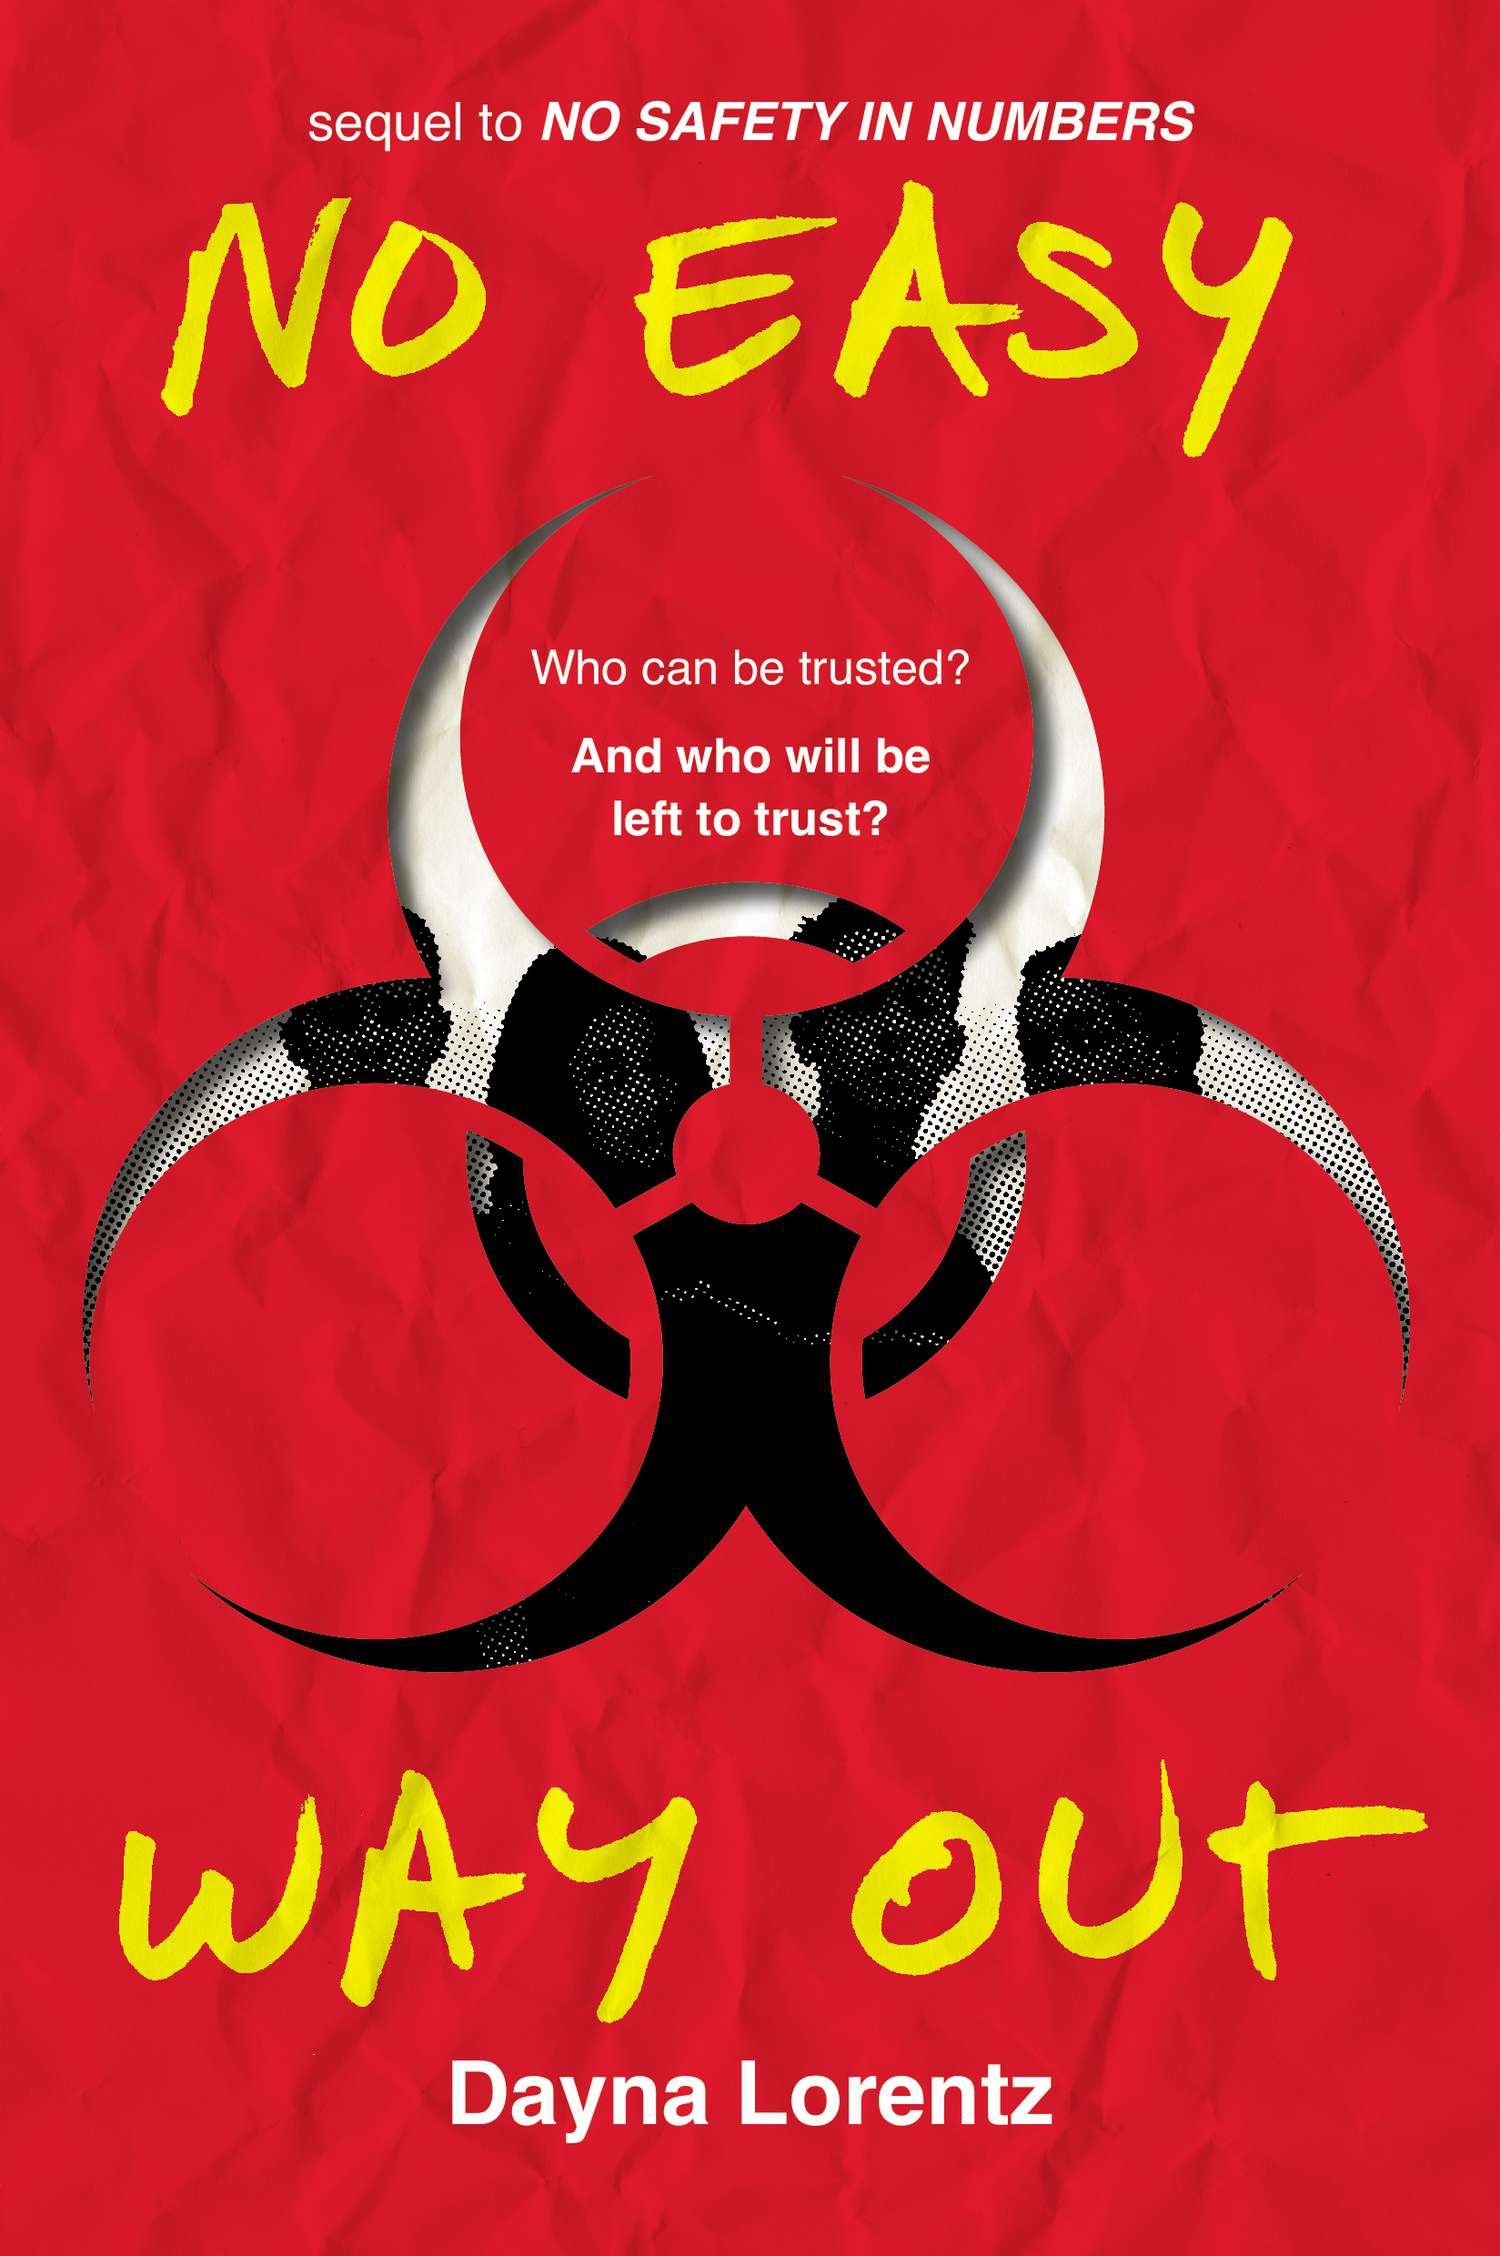 No Easy Way Out No Safety In Numbers Book 2 By Dayna Lorentz